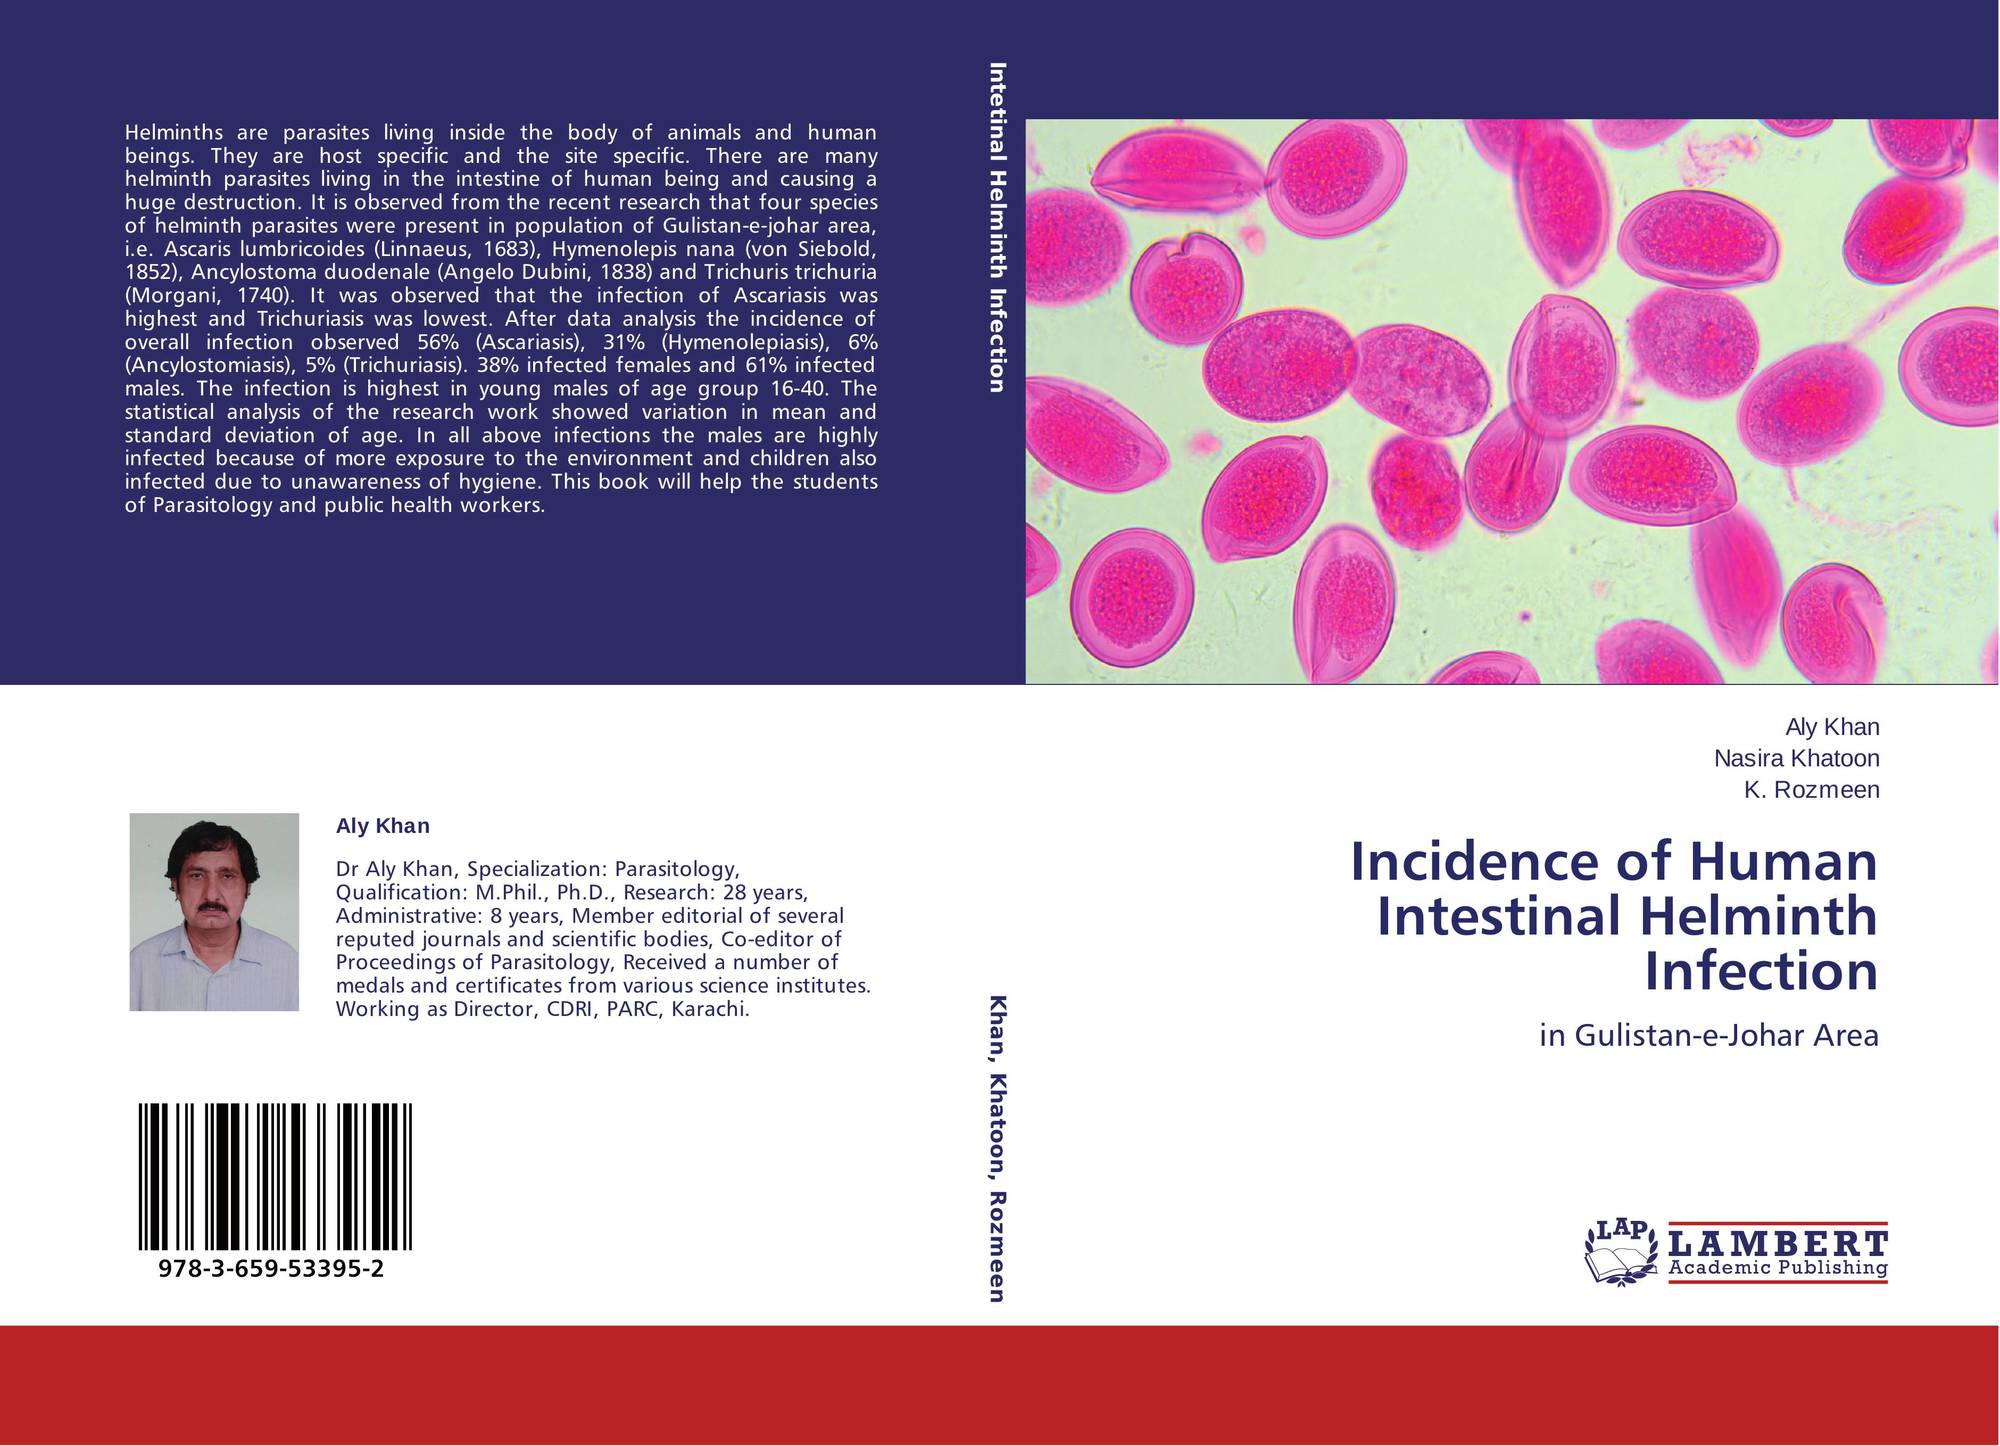 helminth infection incidence